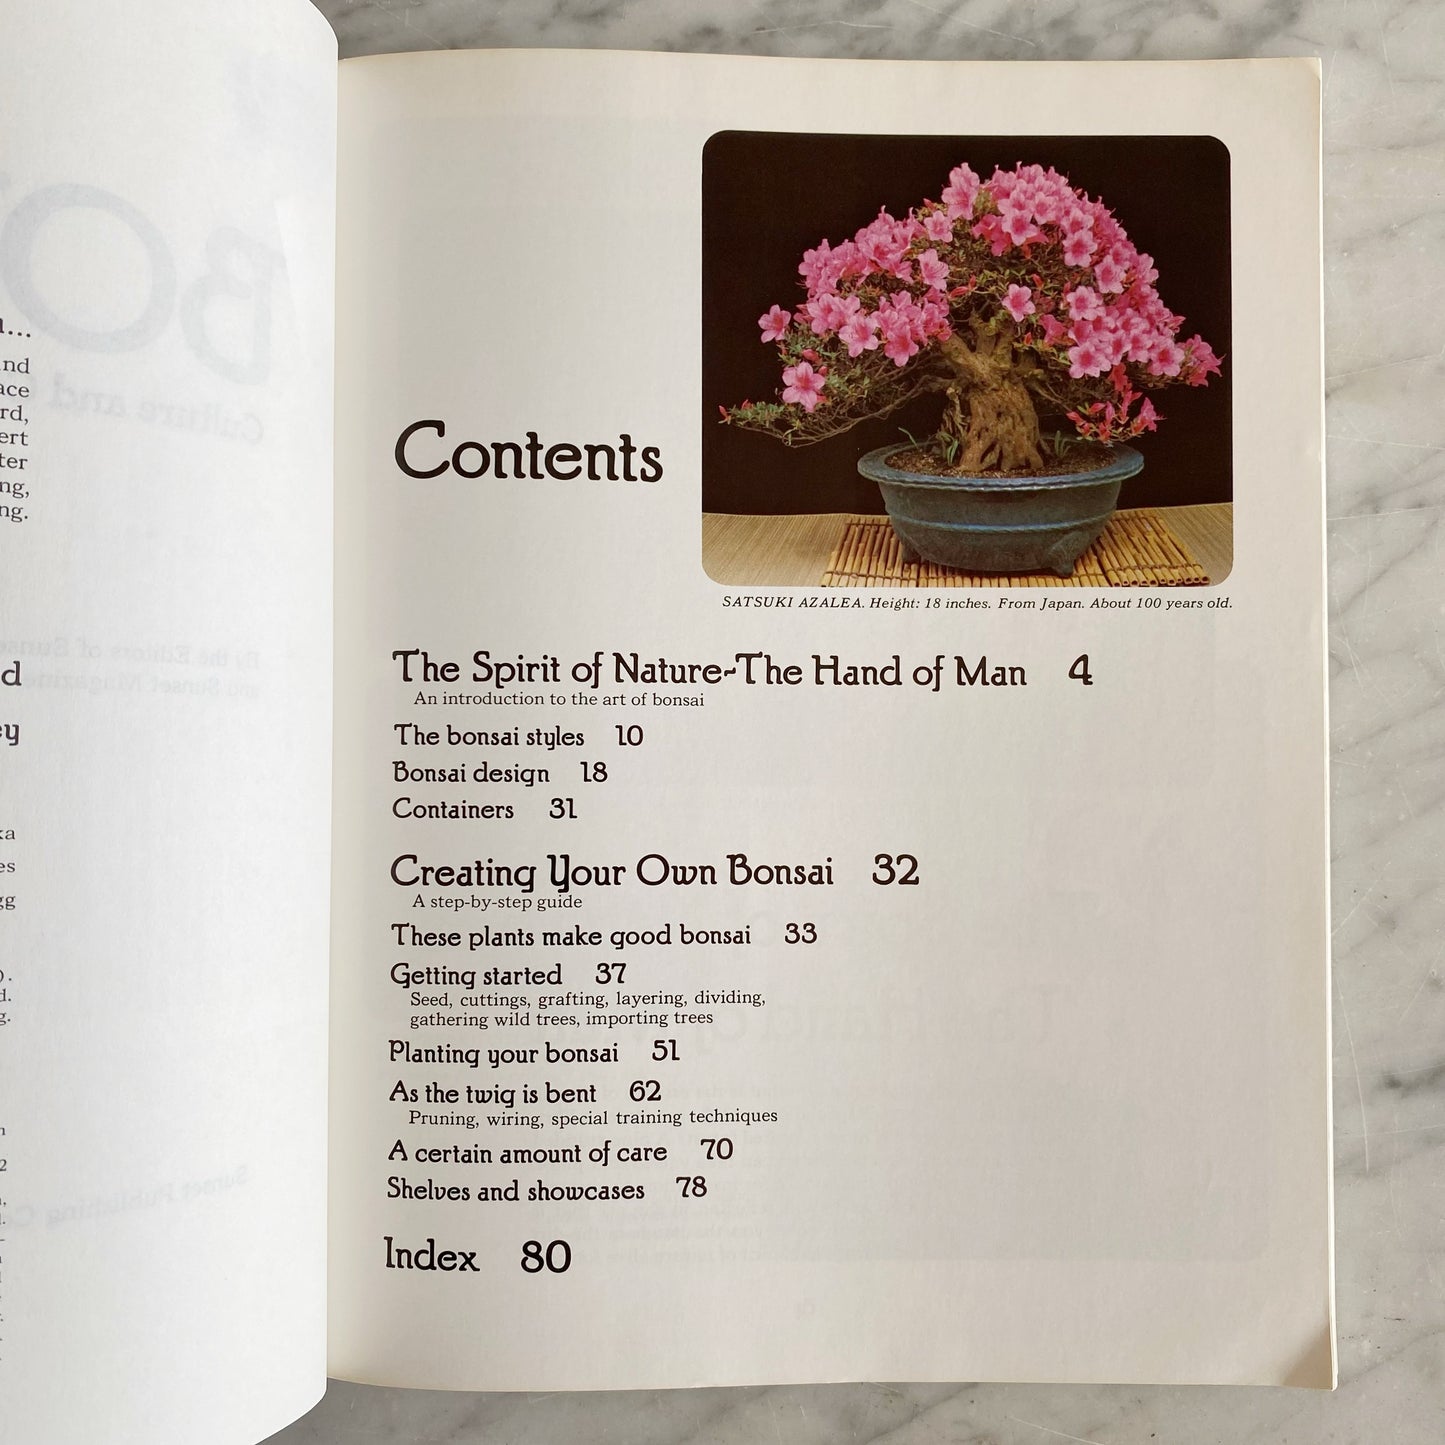 Book: Bonsai, An Illustrated Guide to the Ancient Art